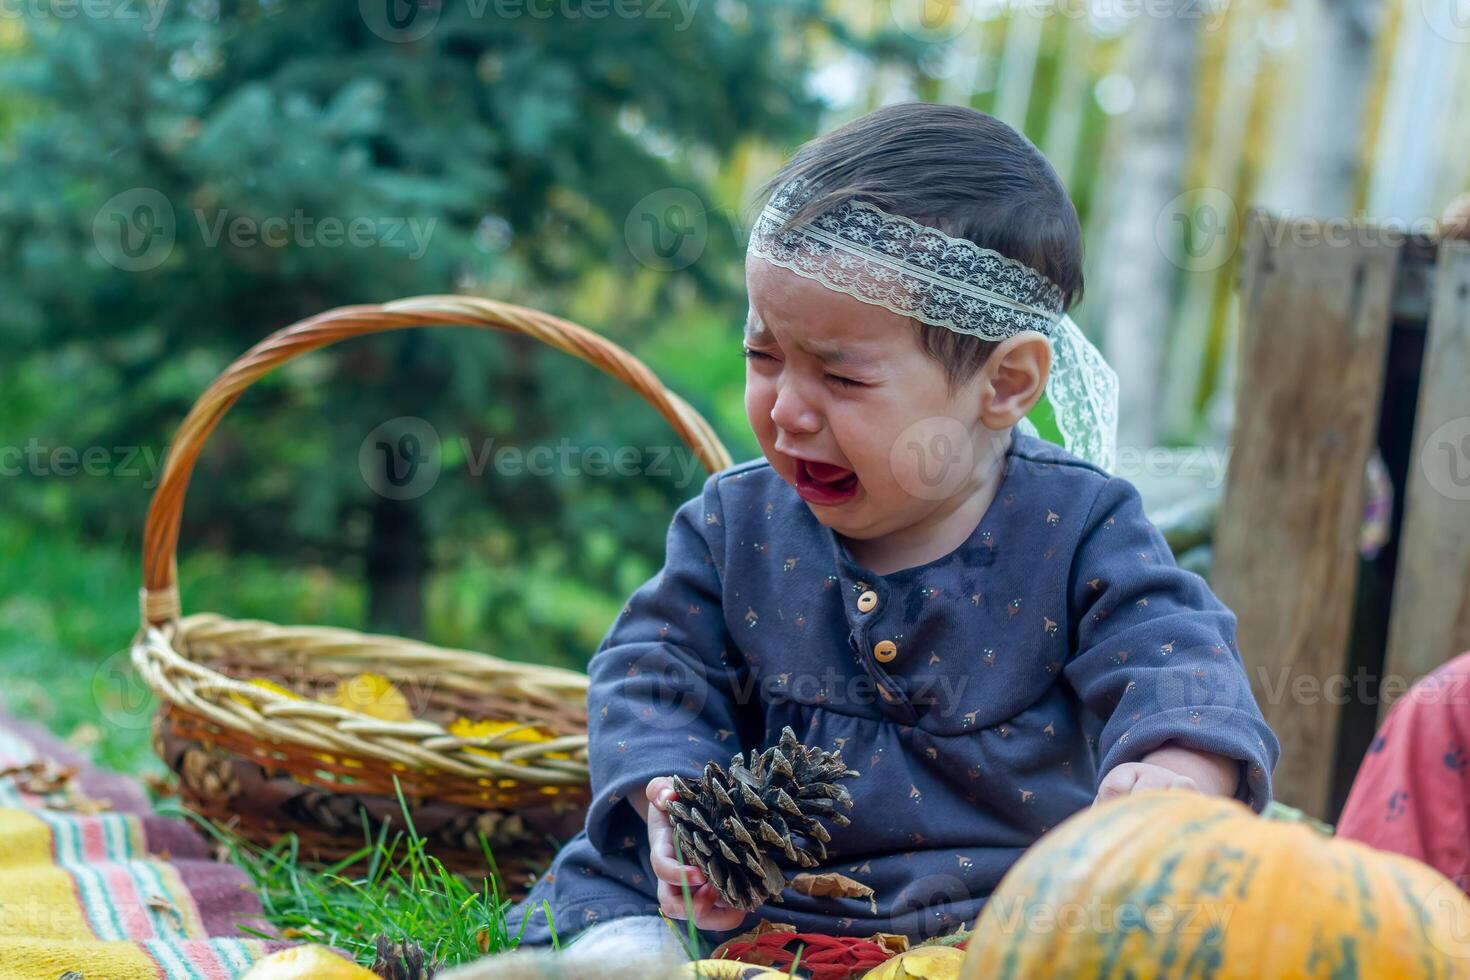 the little child playing in the park with fruits, little girl in the autumn park photo